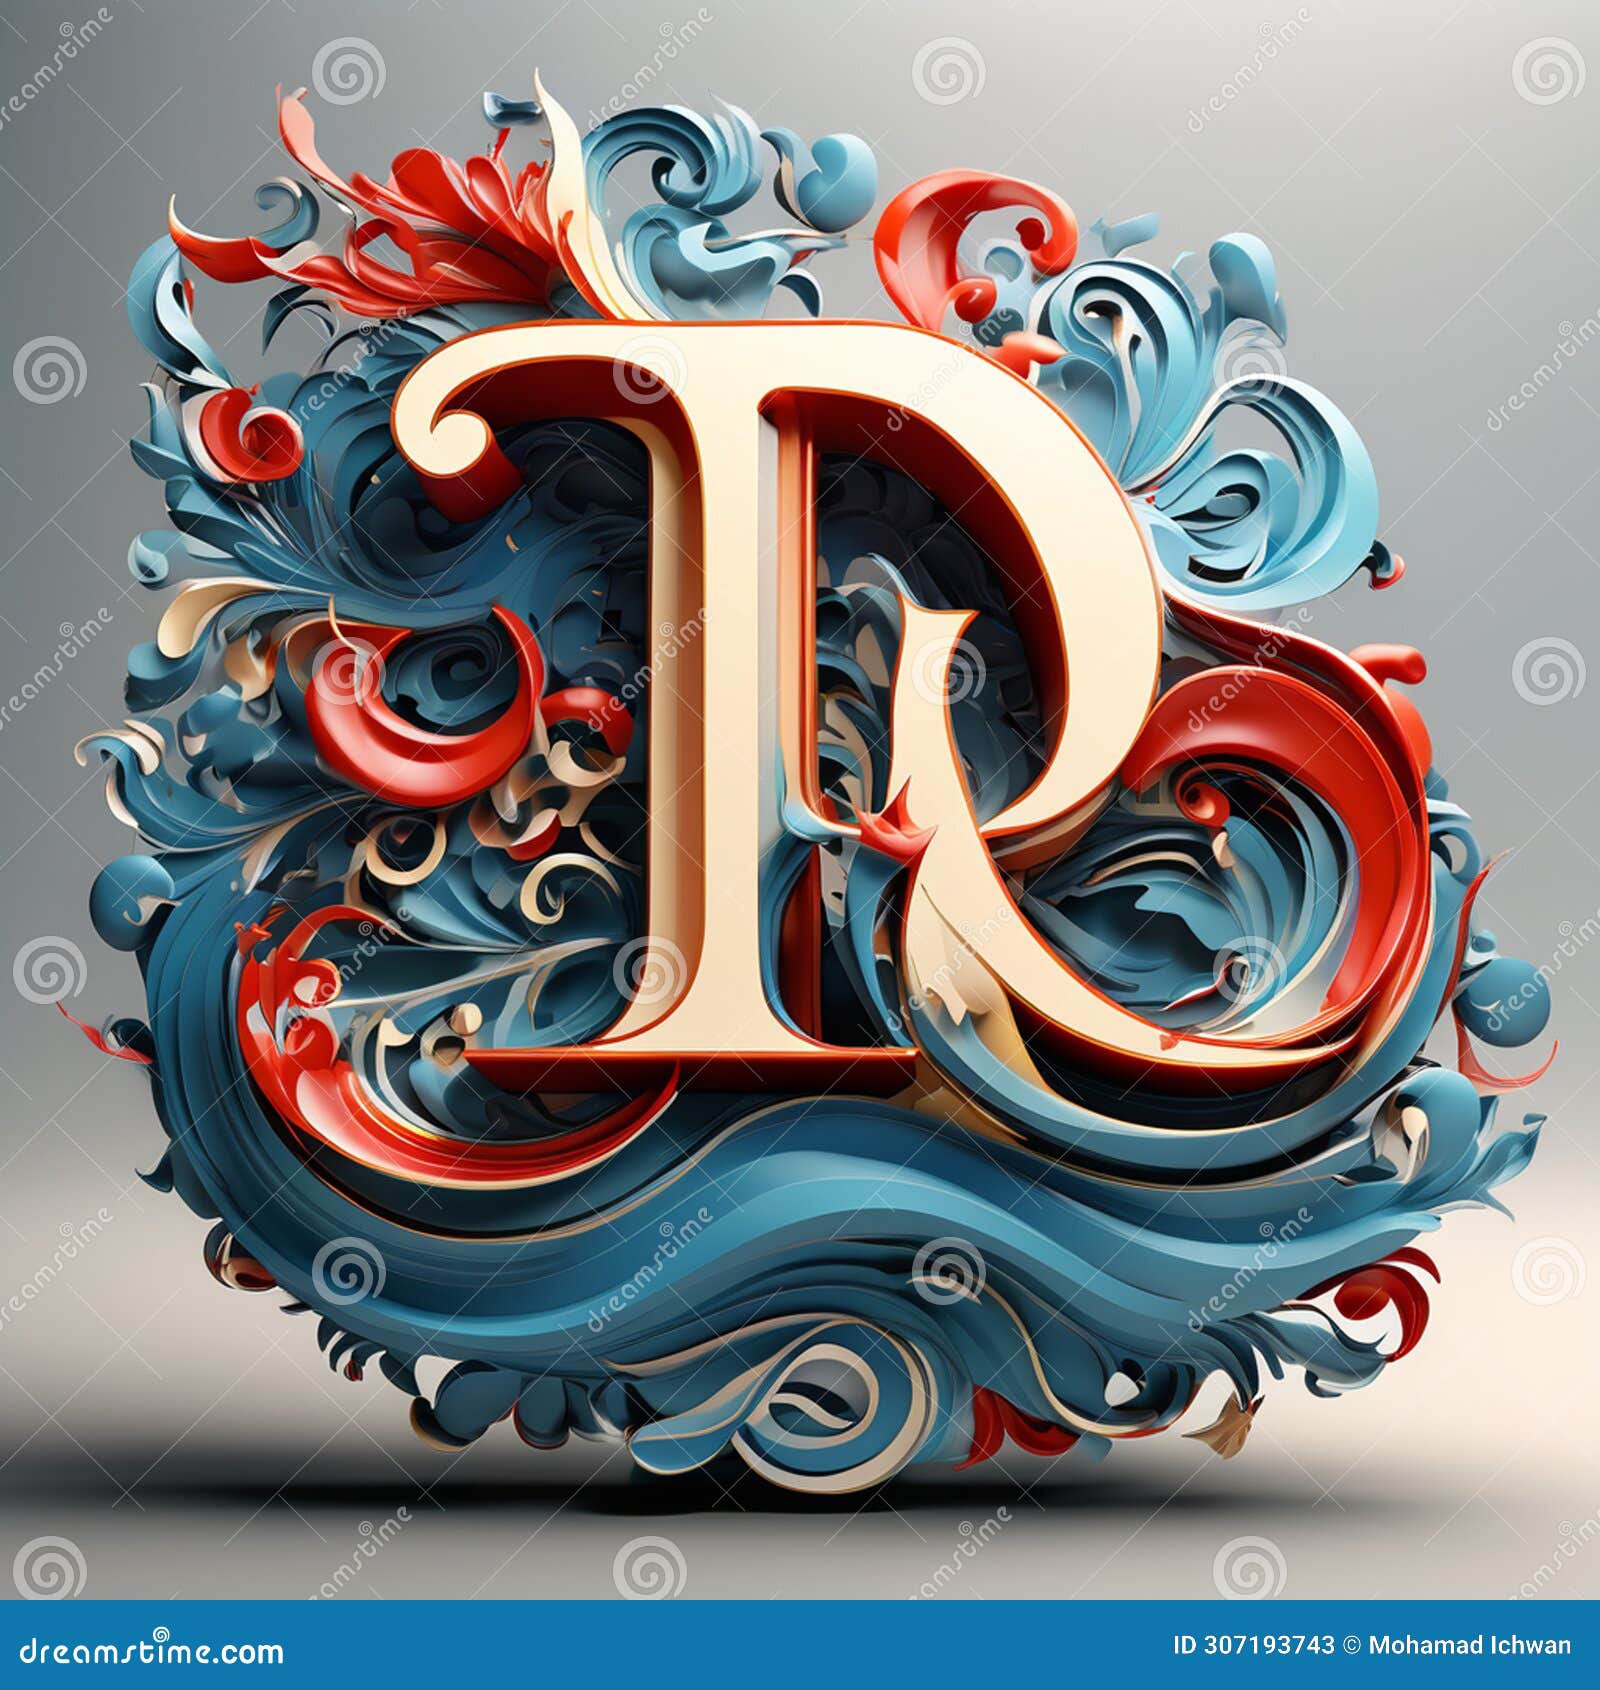 ai generated images, kaleidoscope of the letter r: sinfonia artistica